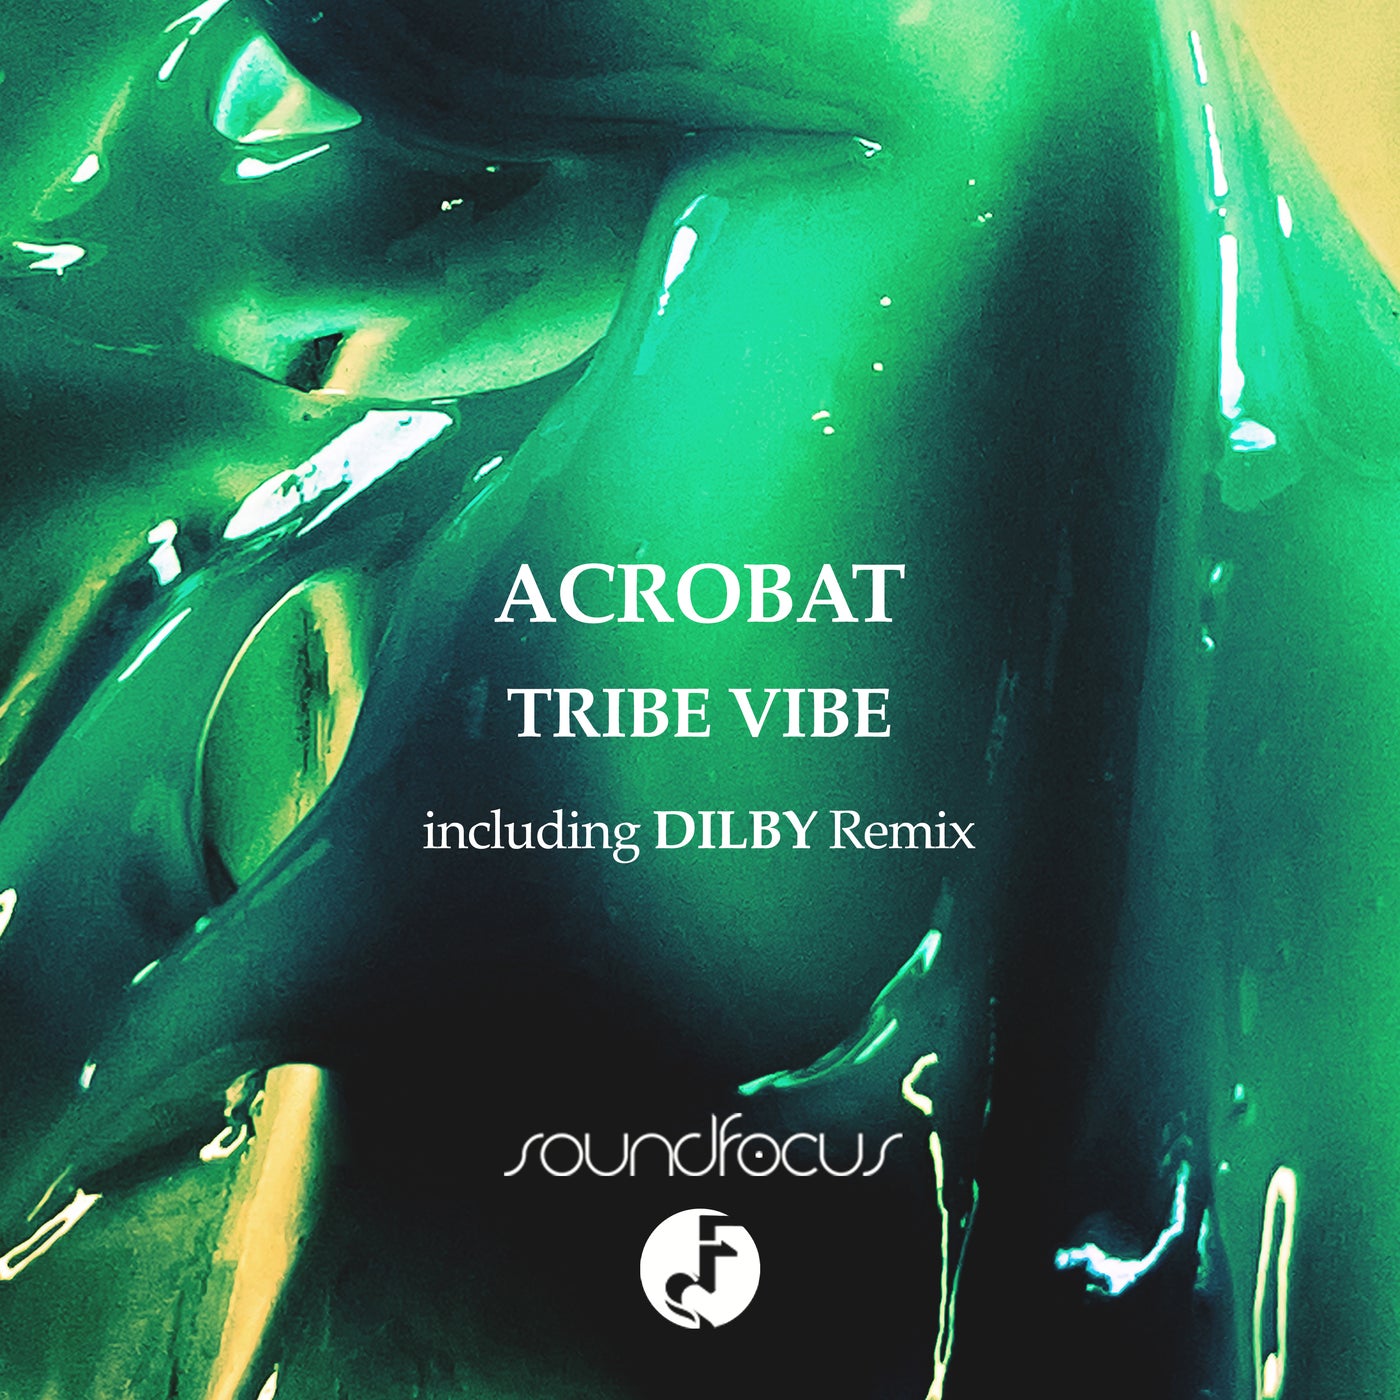 Cover - Acrobat - Tribe Vibe (Dilby Remix extended)